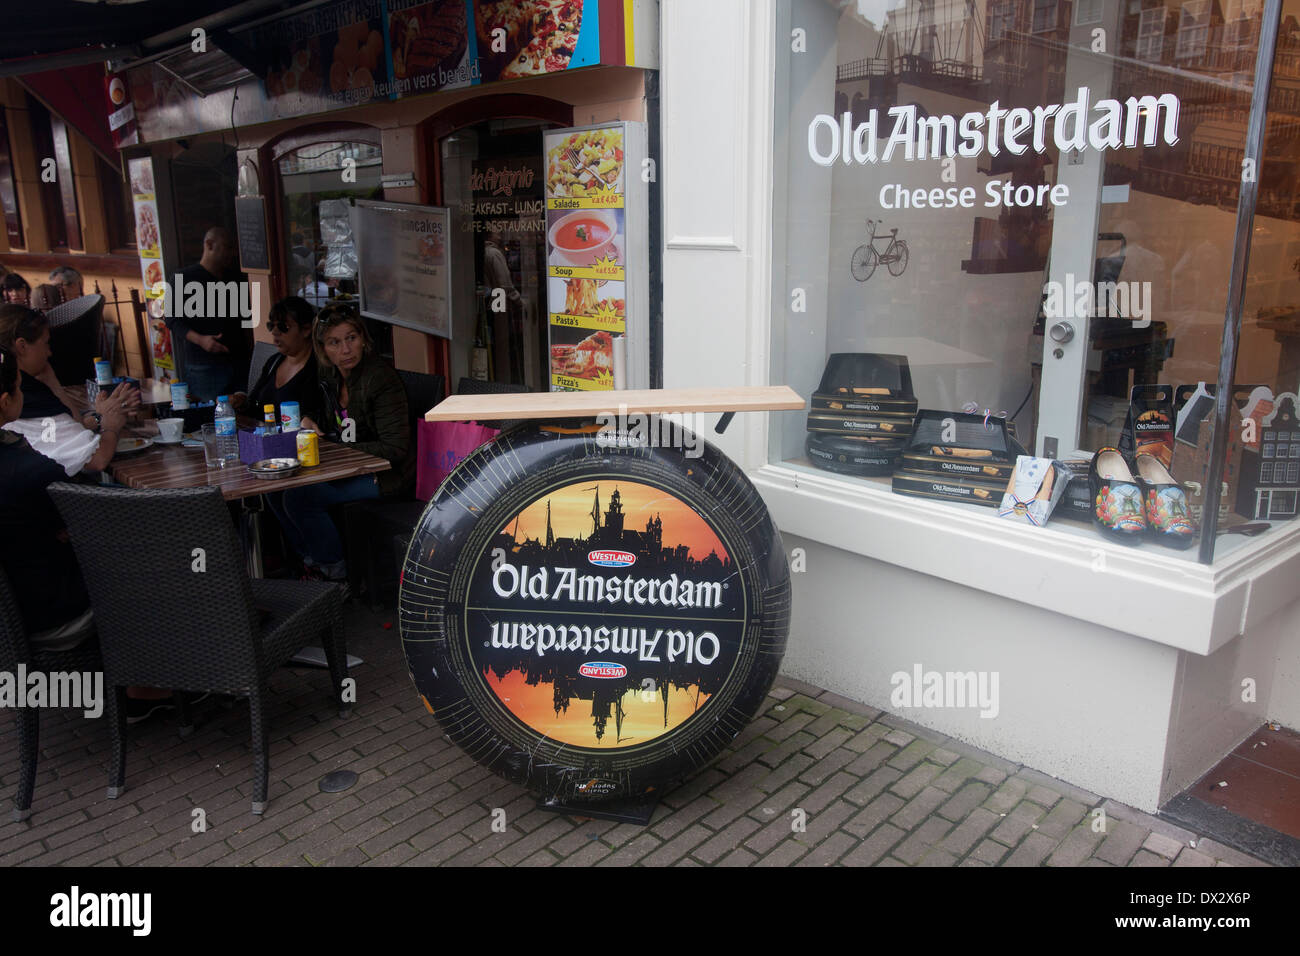 Cheese Shop in Amsterdam, Netherlands Stock Photo